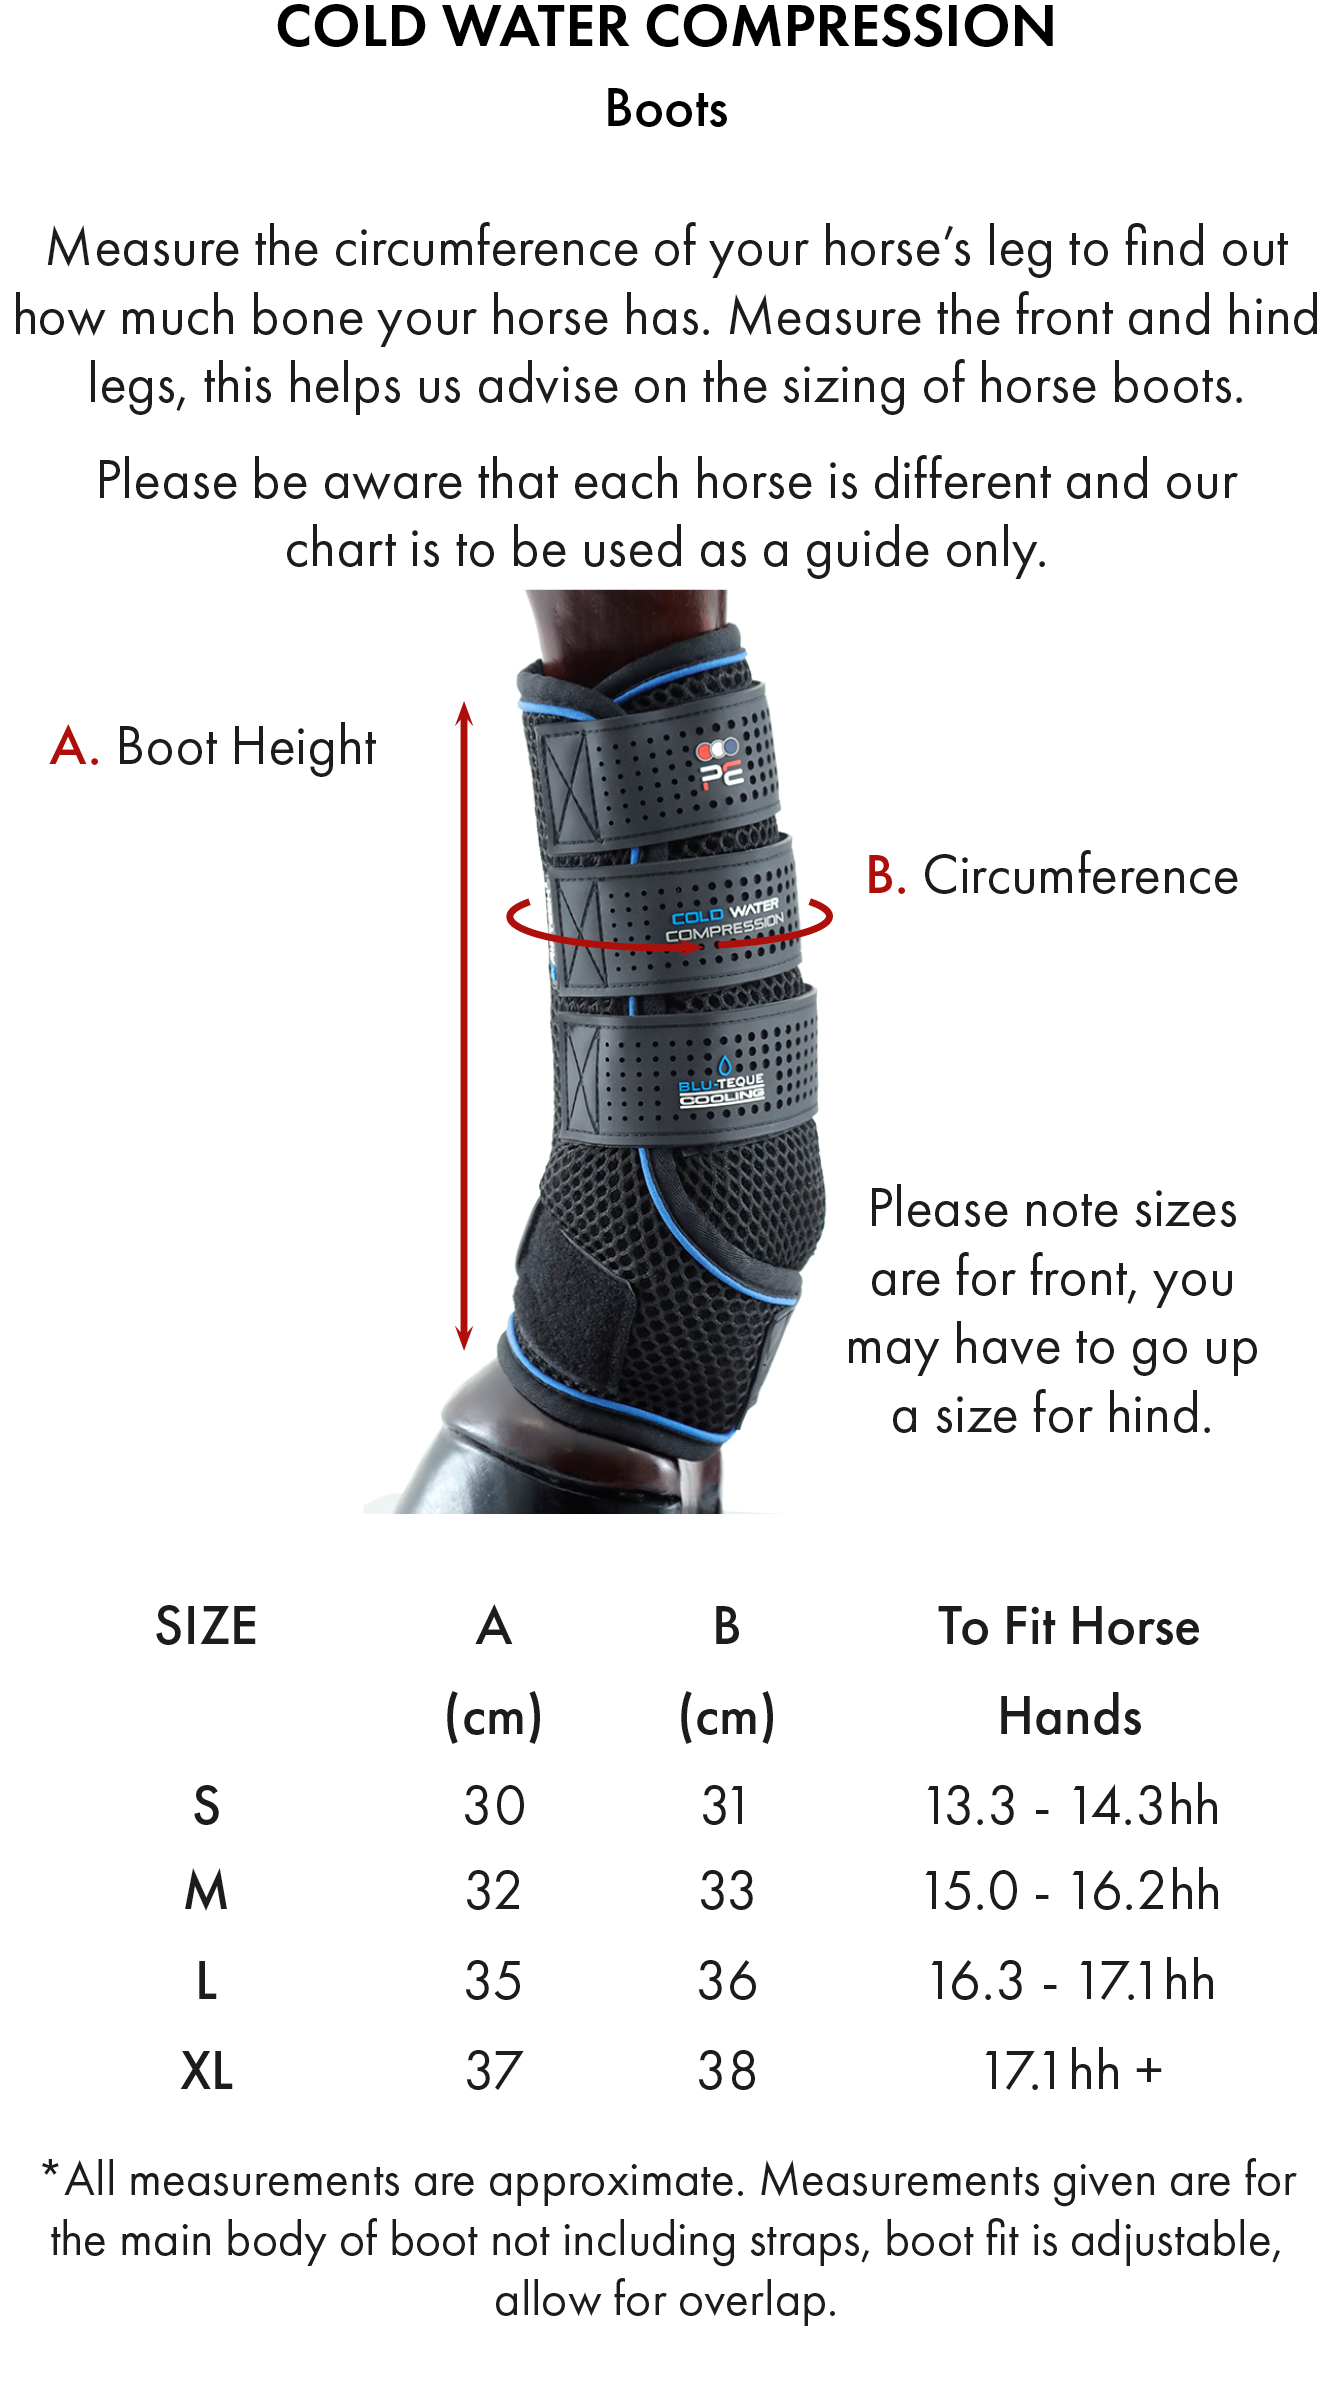 PEI Cold Water Compression Boots